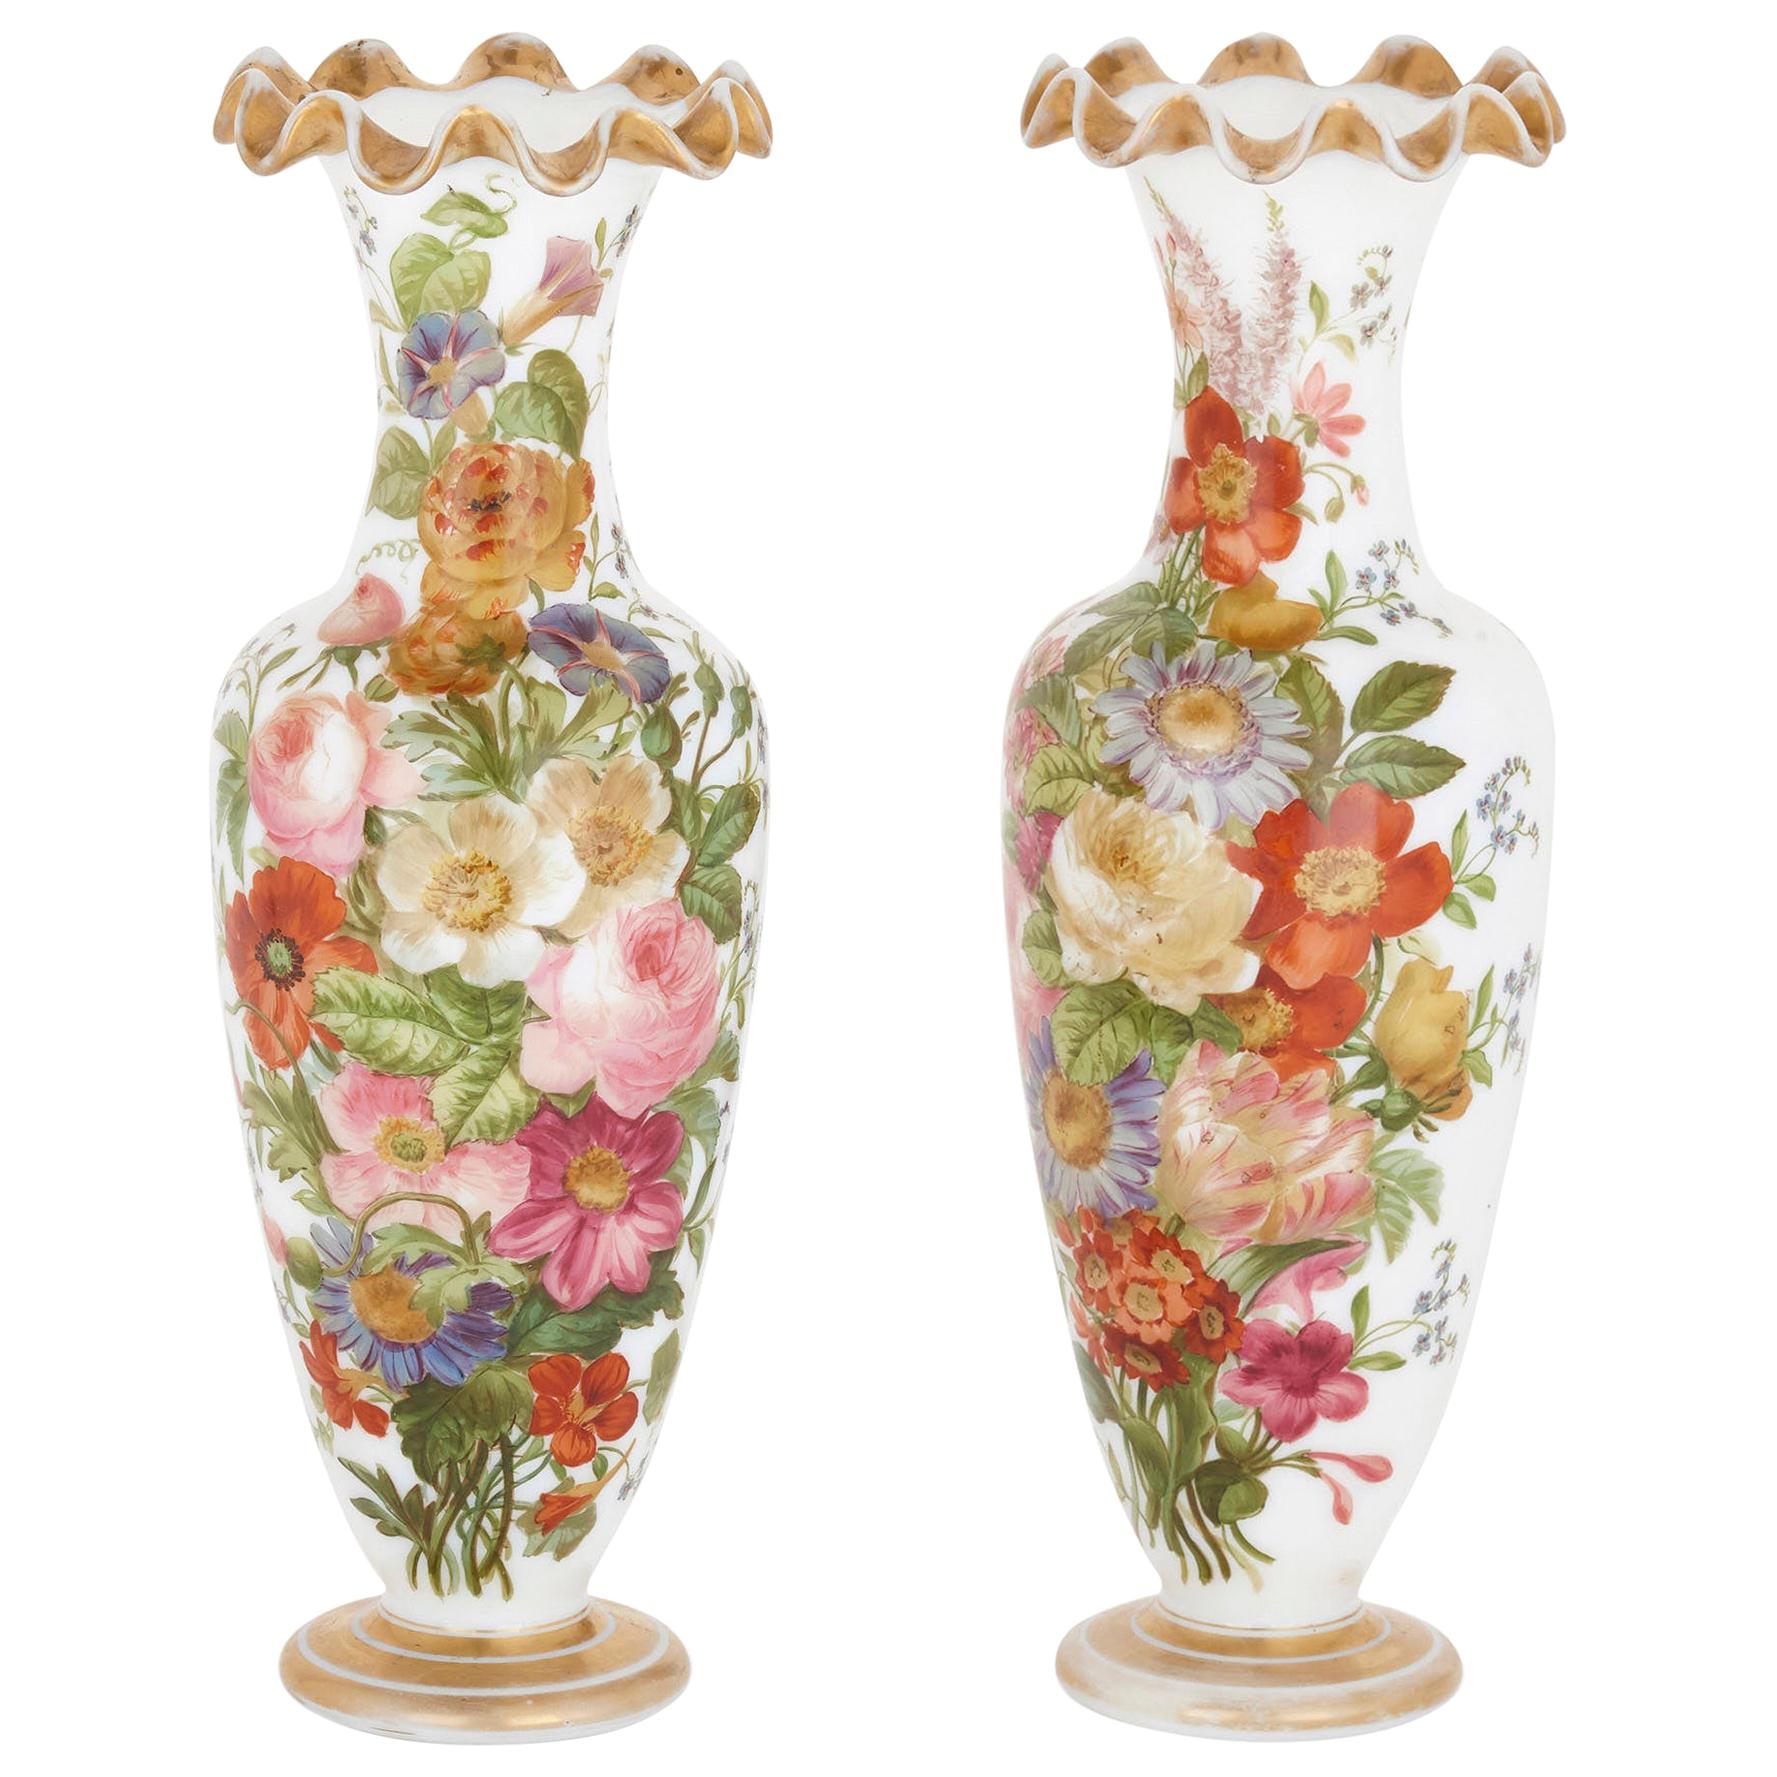 Pair of Mid-19th Century Baccarat Enameled Glass Vases